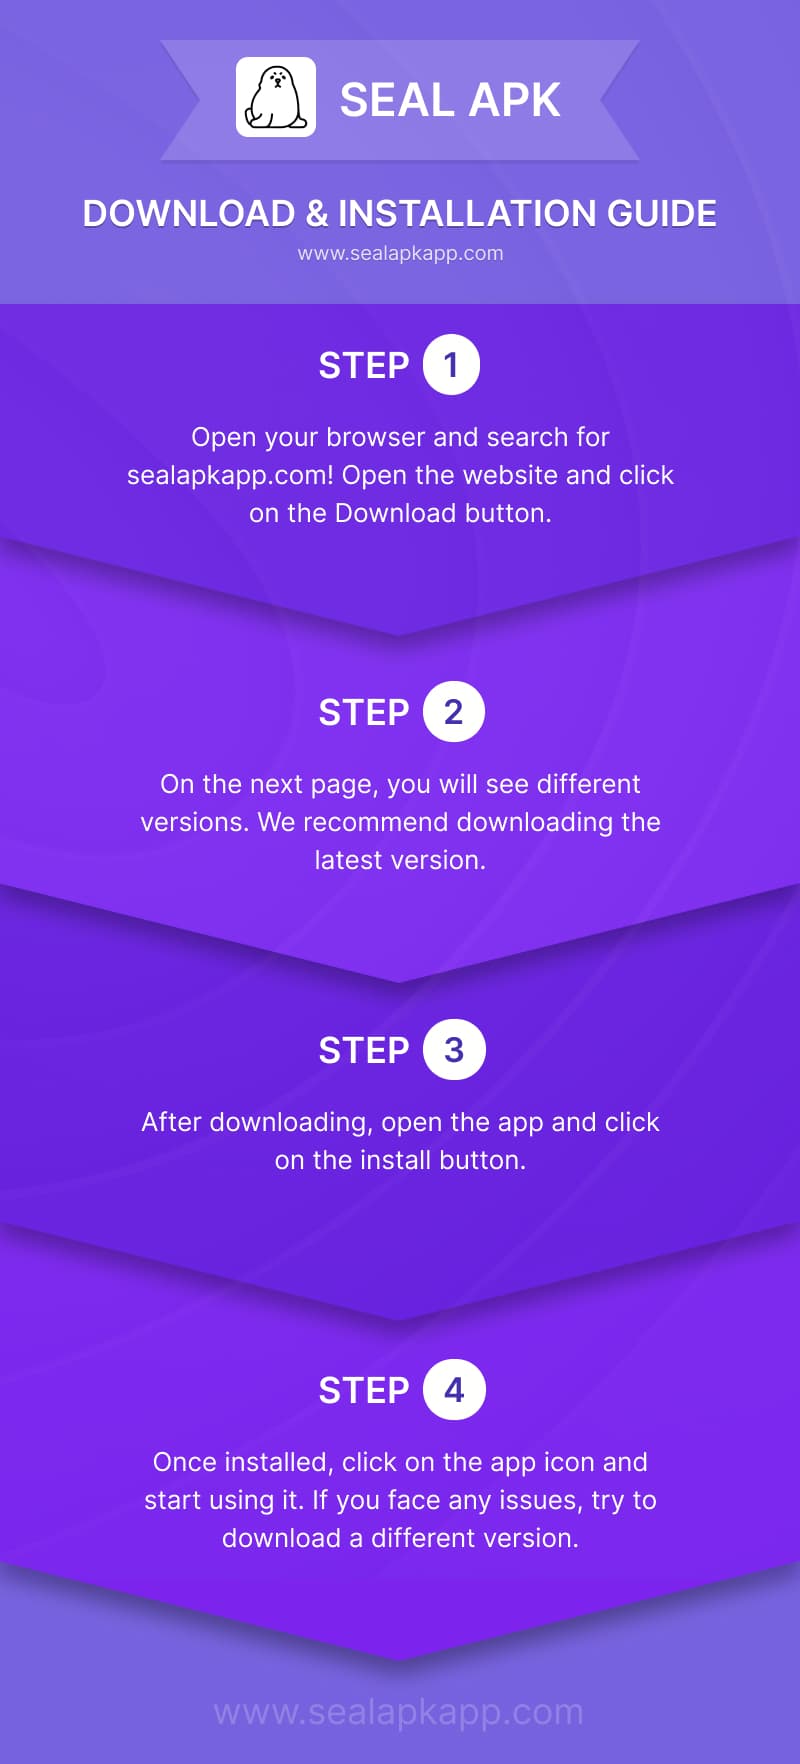 seal APK app infographic to download and install app